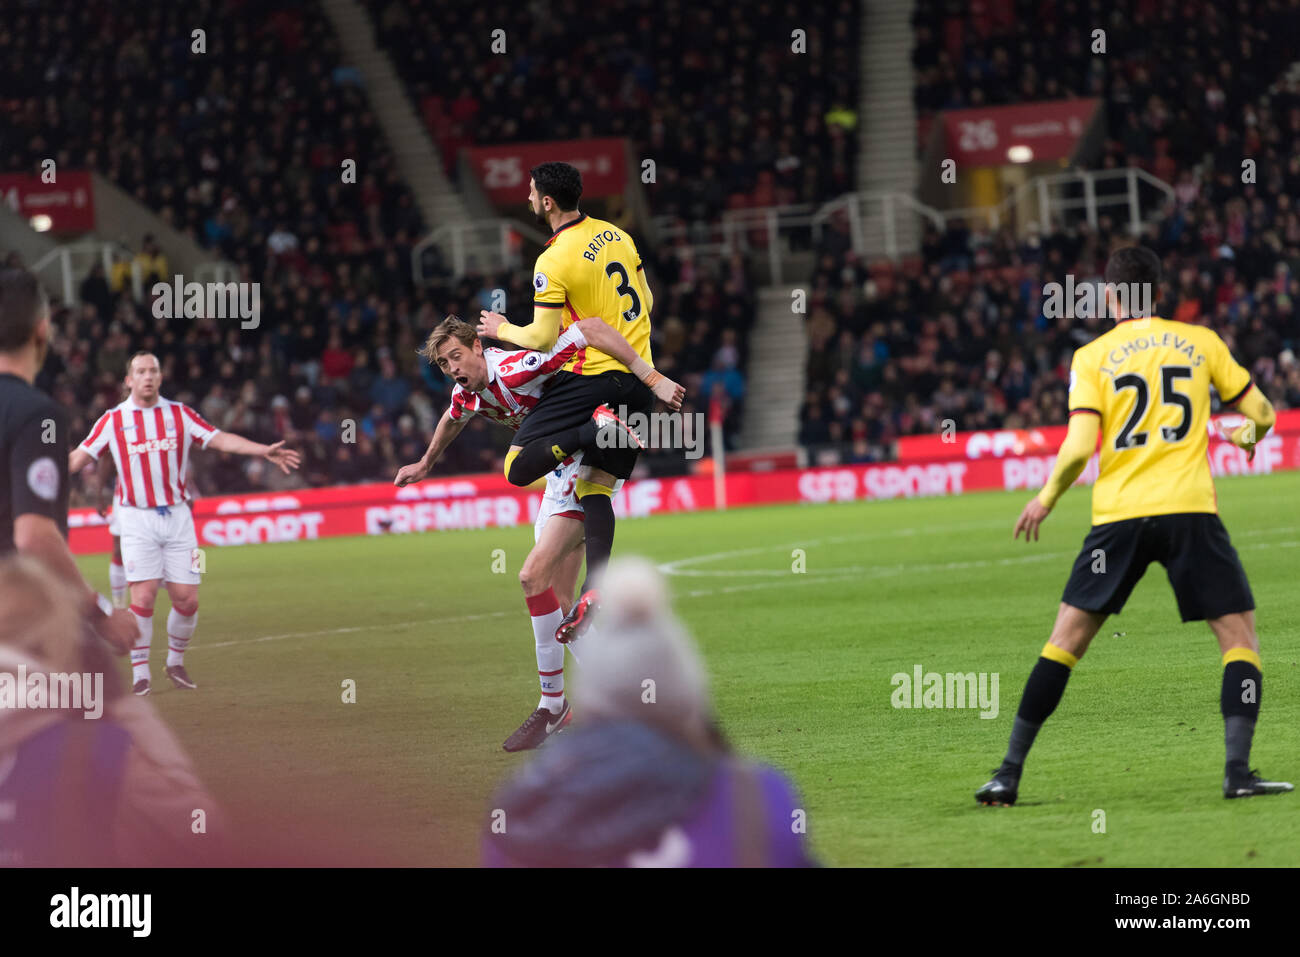 Peter Crouch playing for Stoke City against Watford in the Barclays Premier League Stock Photo